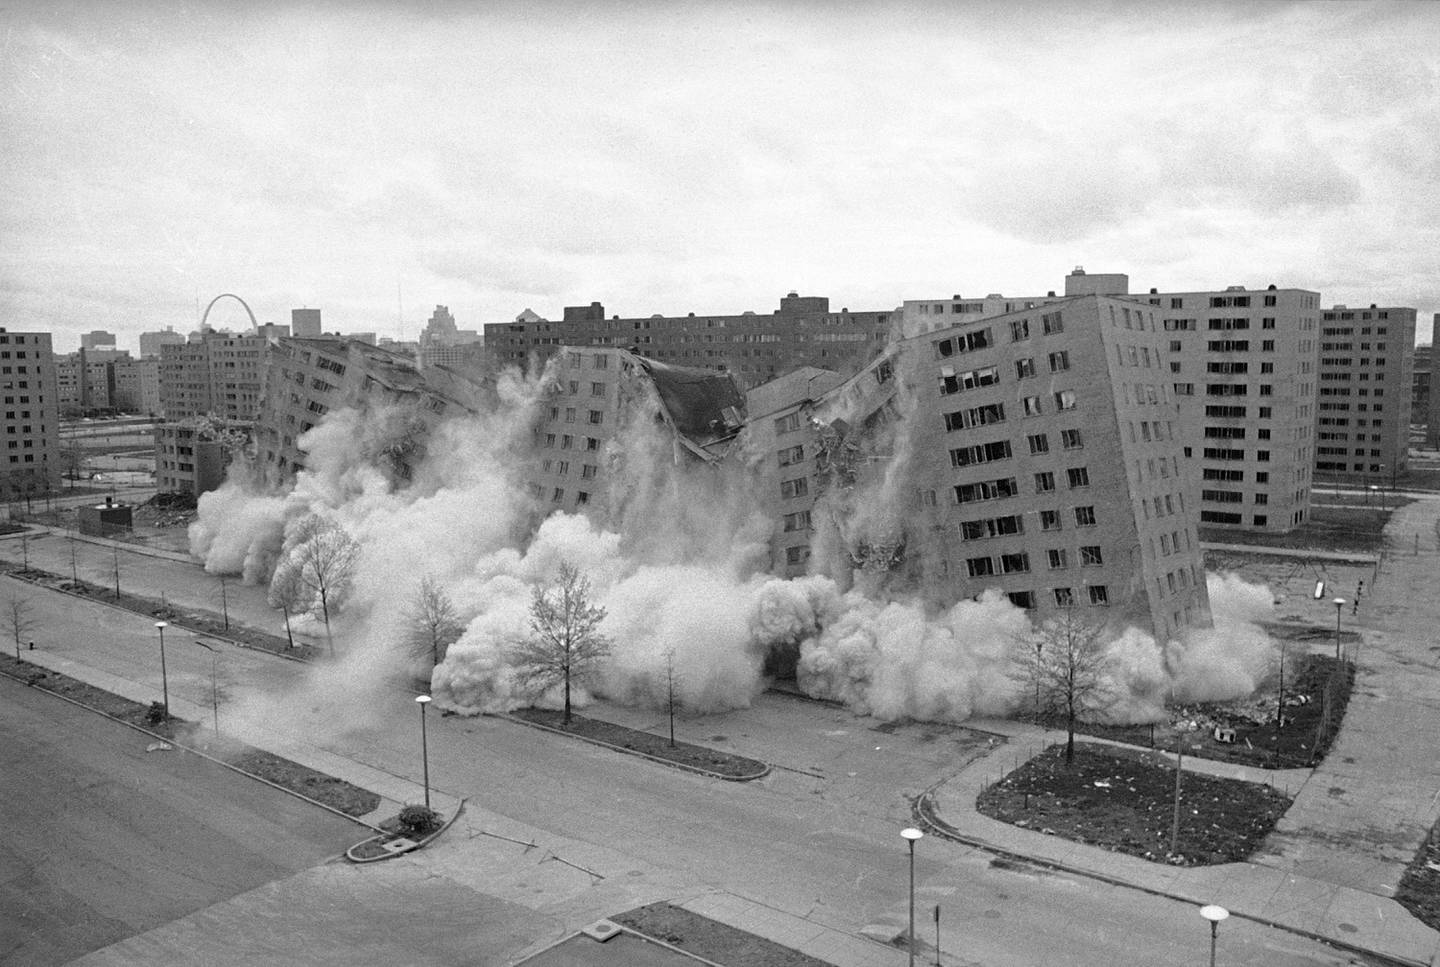 This long-vacant 11-story building in the Pruitt-Igoe public housing development in St. Louis, Missouri, was demolished by dynamite charges, April 21, 1972.  It was the second building to be wrecked in a program designed to determine if the buildings could be altered to make them more liveable or if this method of demolition is better than conventional dismantling techniques.  (AP Photo/Fred Waters)